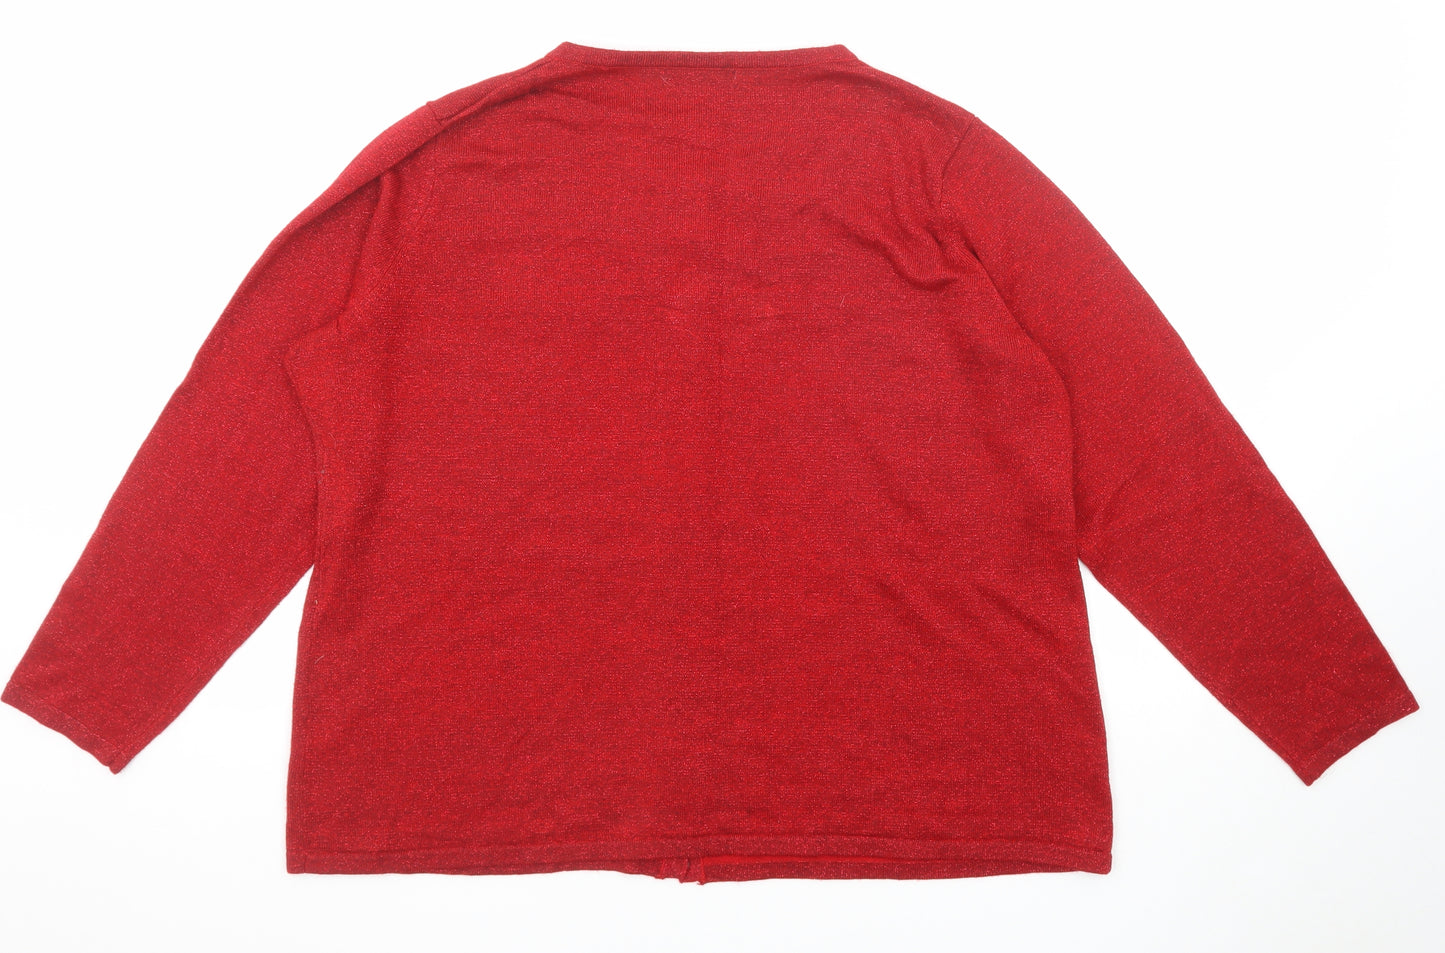 Bonmarché Womens Red Round Neck Acrylic Cardigan Jumper Size XL